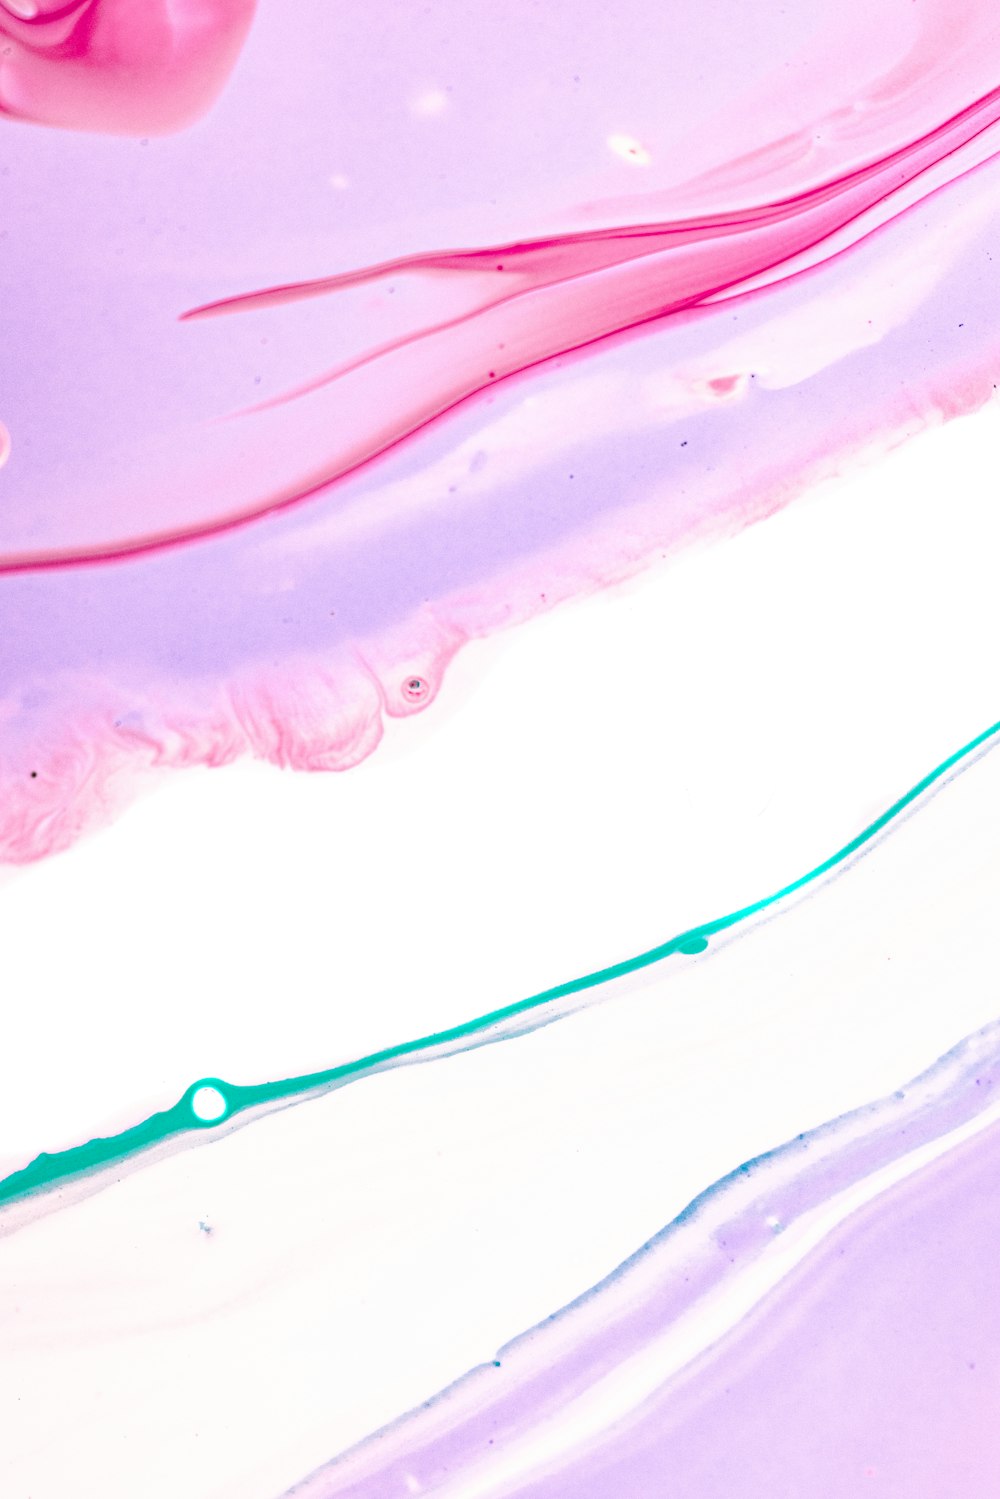 a close up of a pink and purple liquid